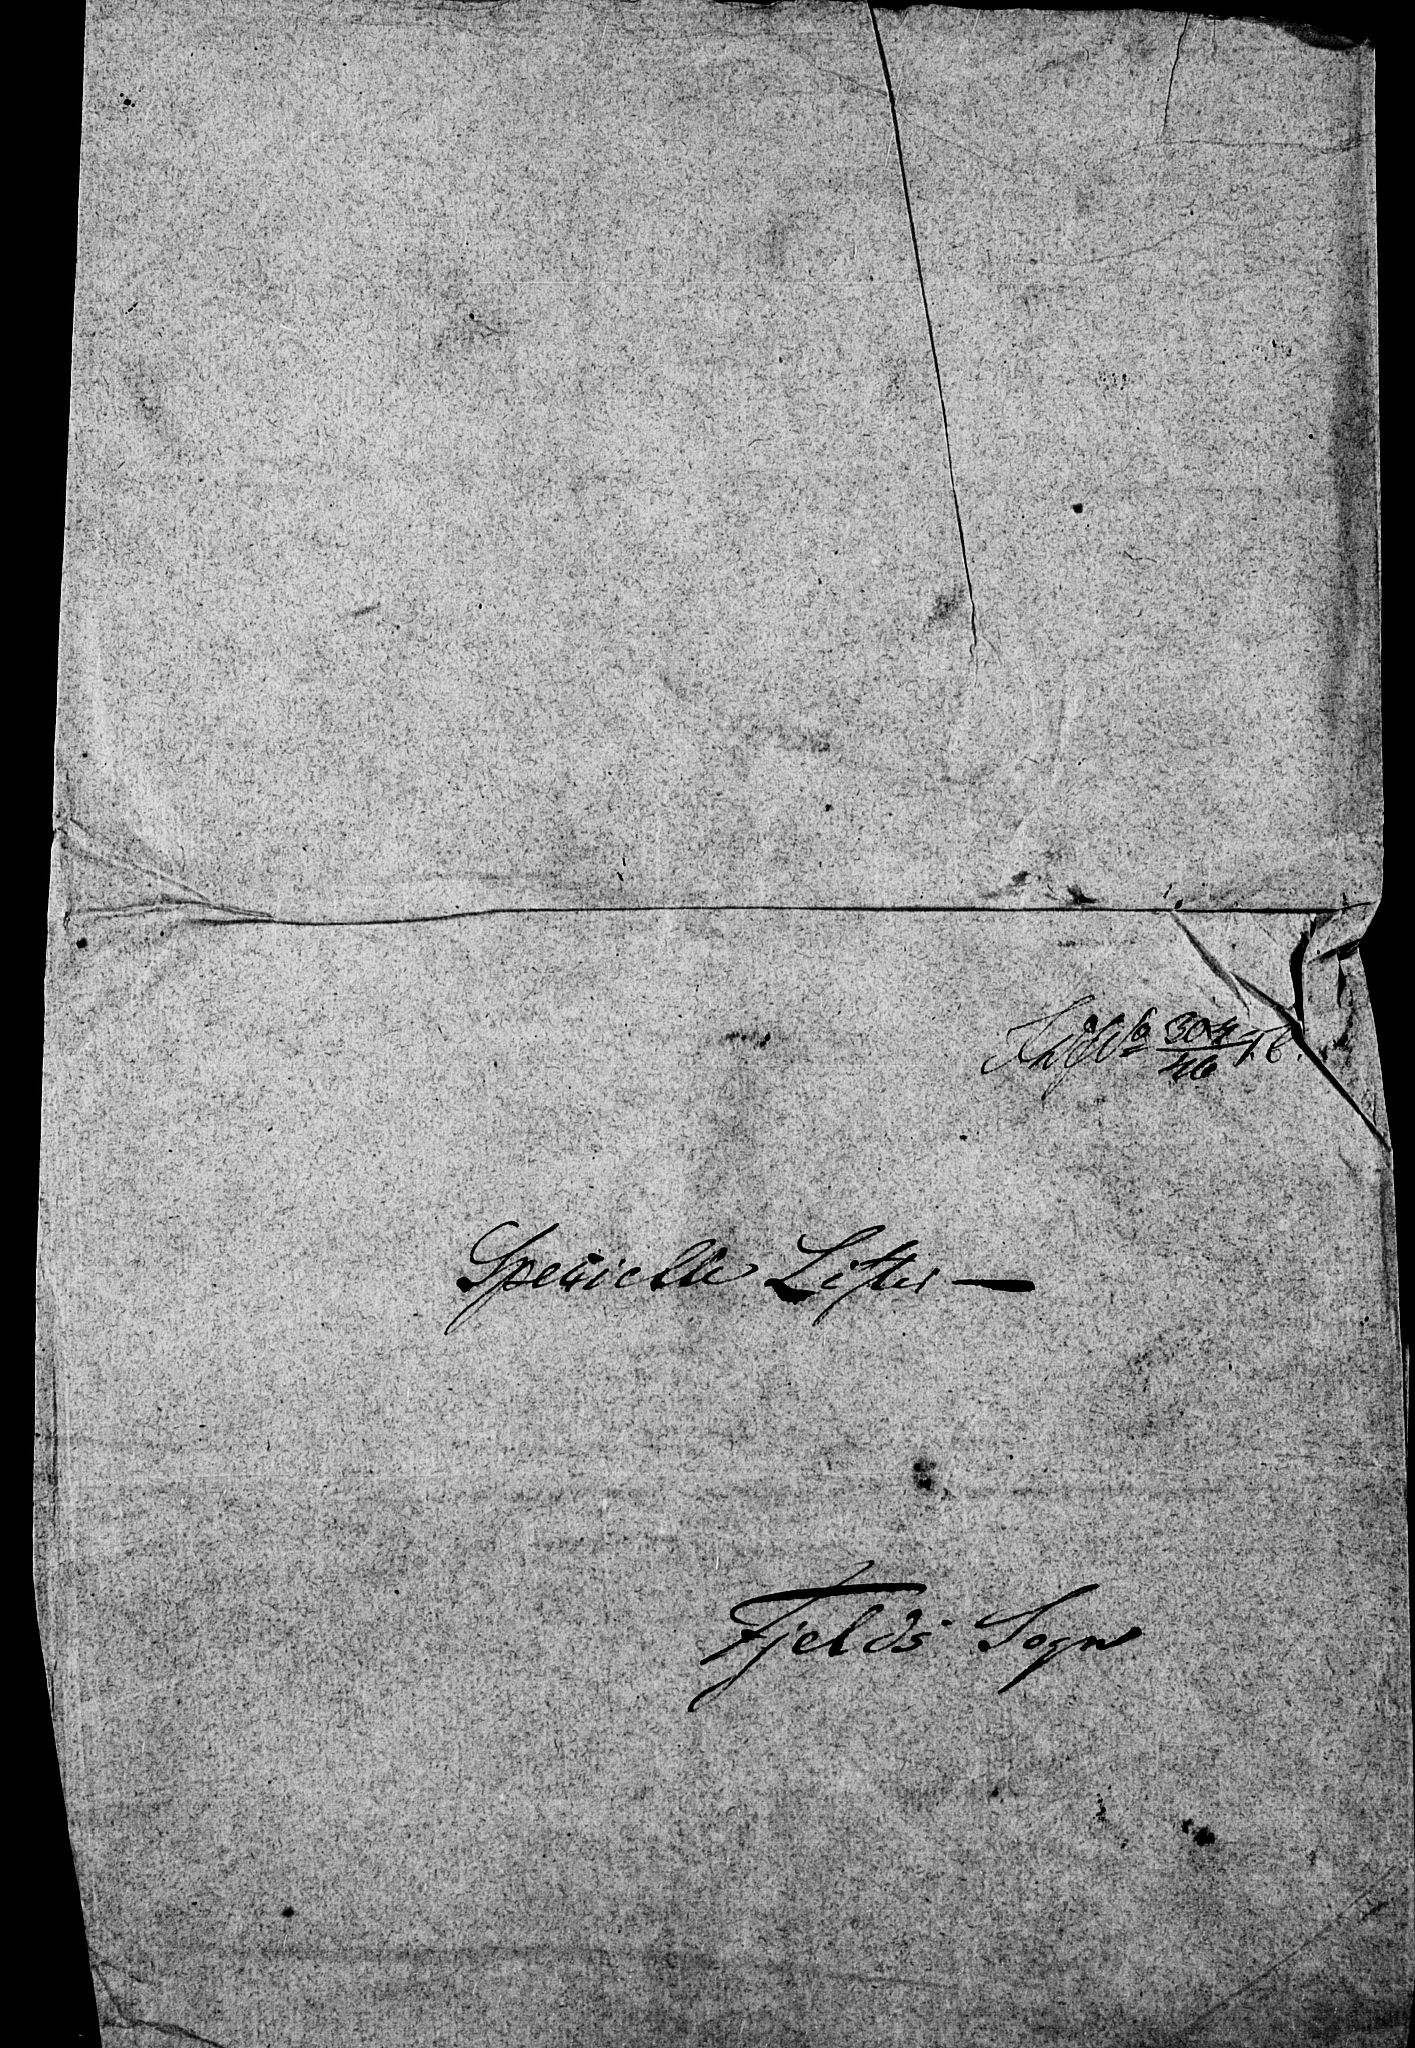 , Census 1845 for Fjell/Fjell, 1845, p. 2